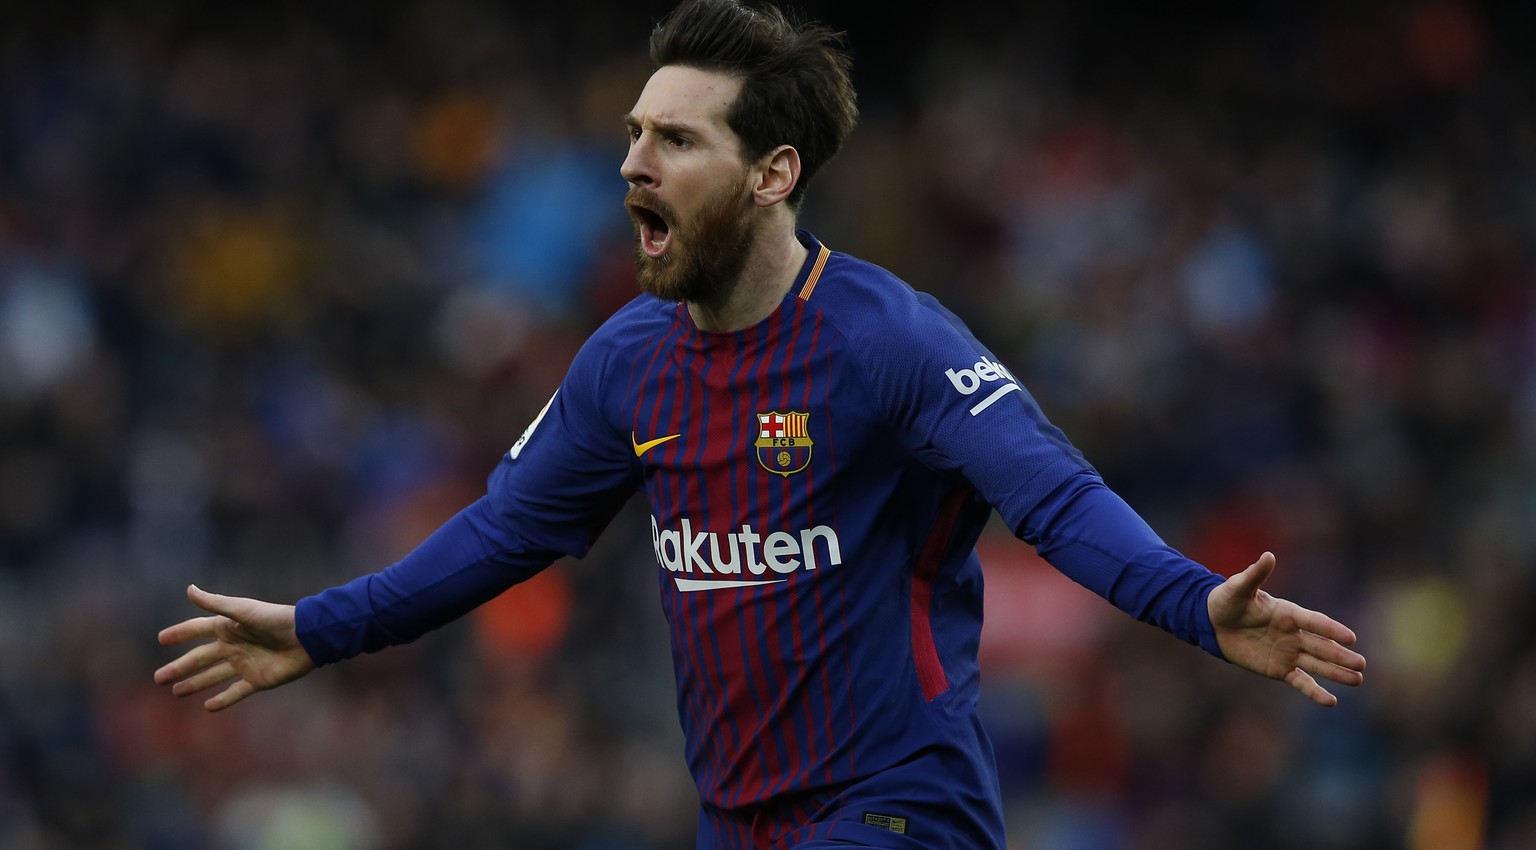 FC Barcelona&#039;s Lionel Messi reacts after scoring during the Spanish La Liga soccer match between FC Barcelona and Atletico Madrid at the Camp Nou stadium in Barcelona, Spain, Sunday, March 4, 201 ...